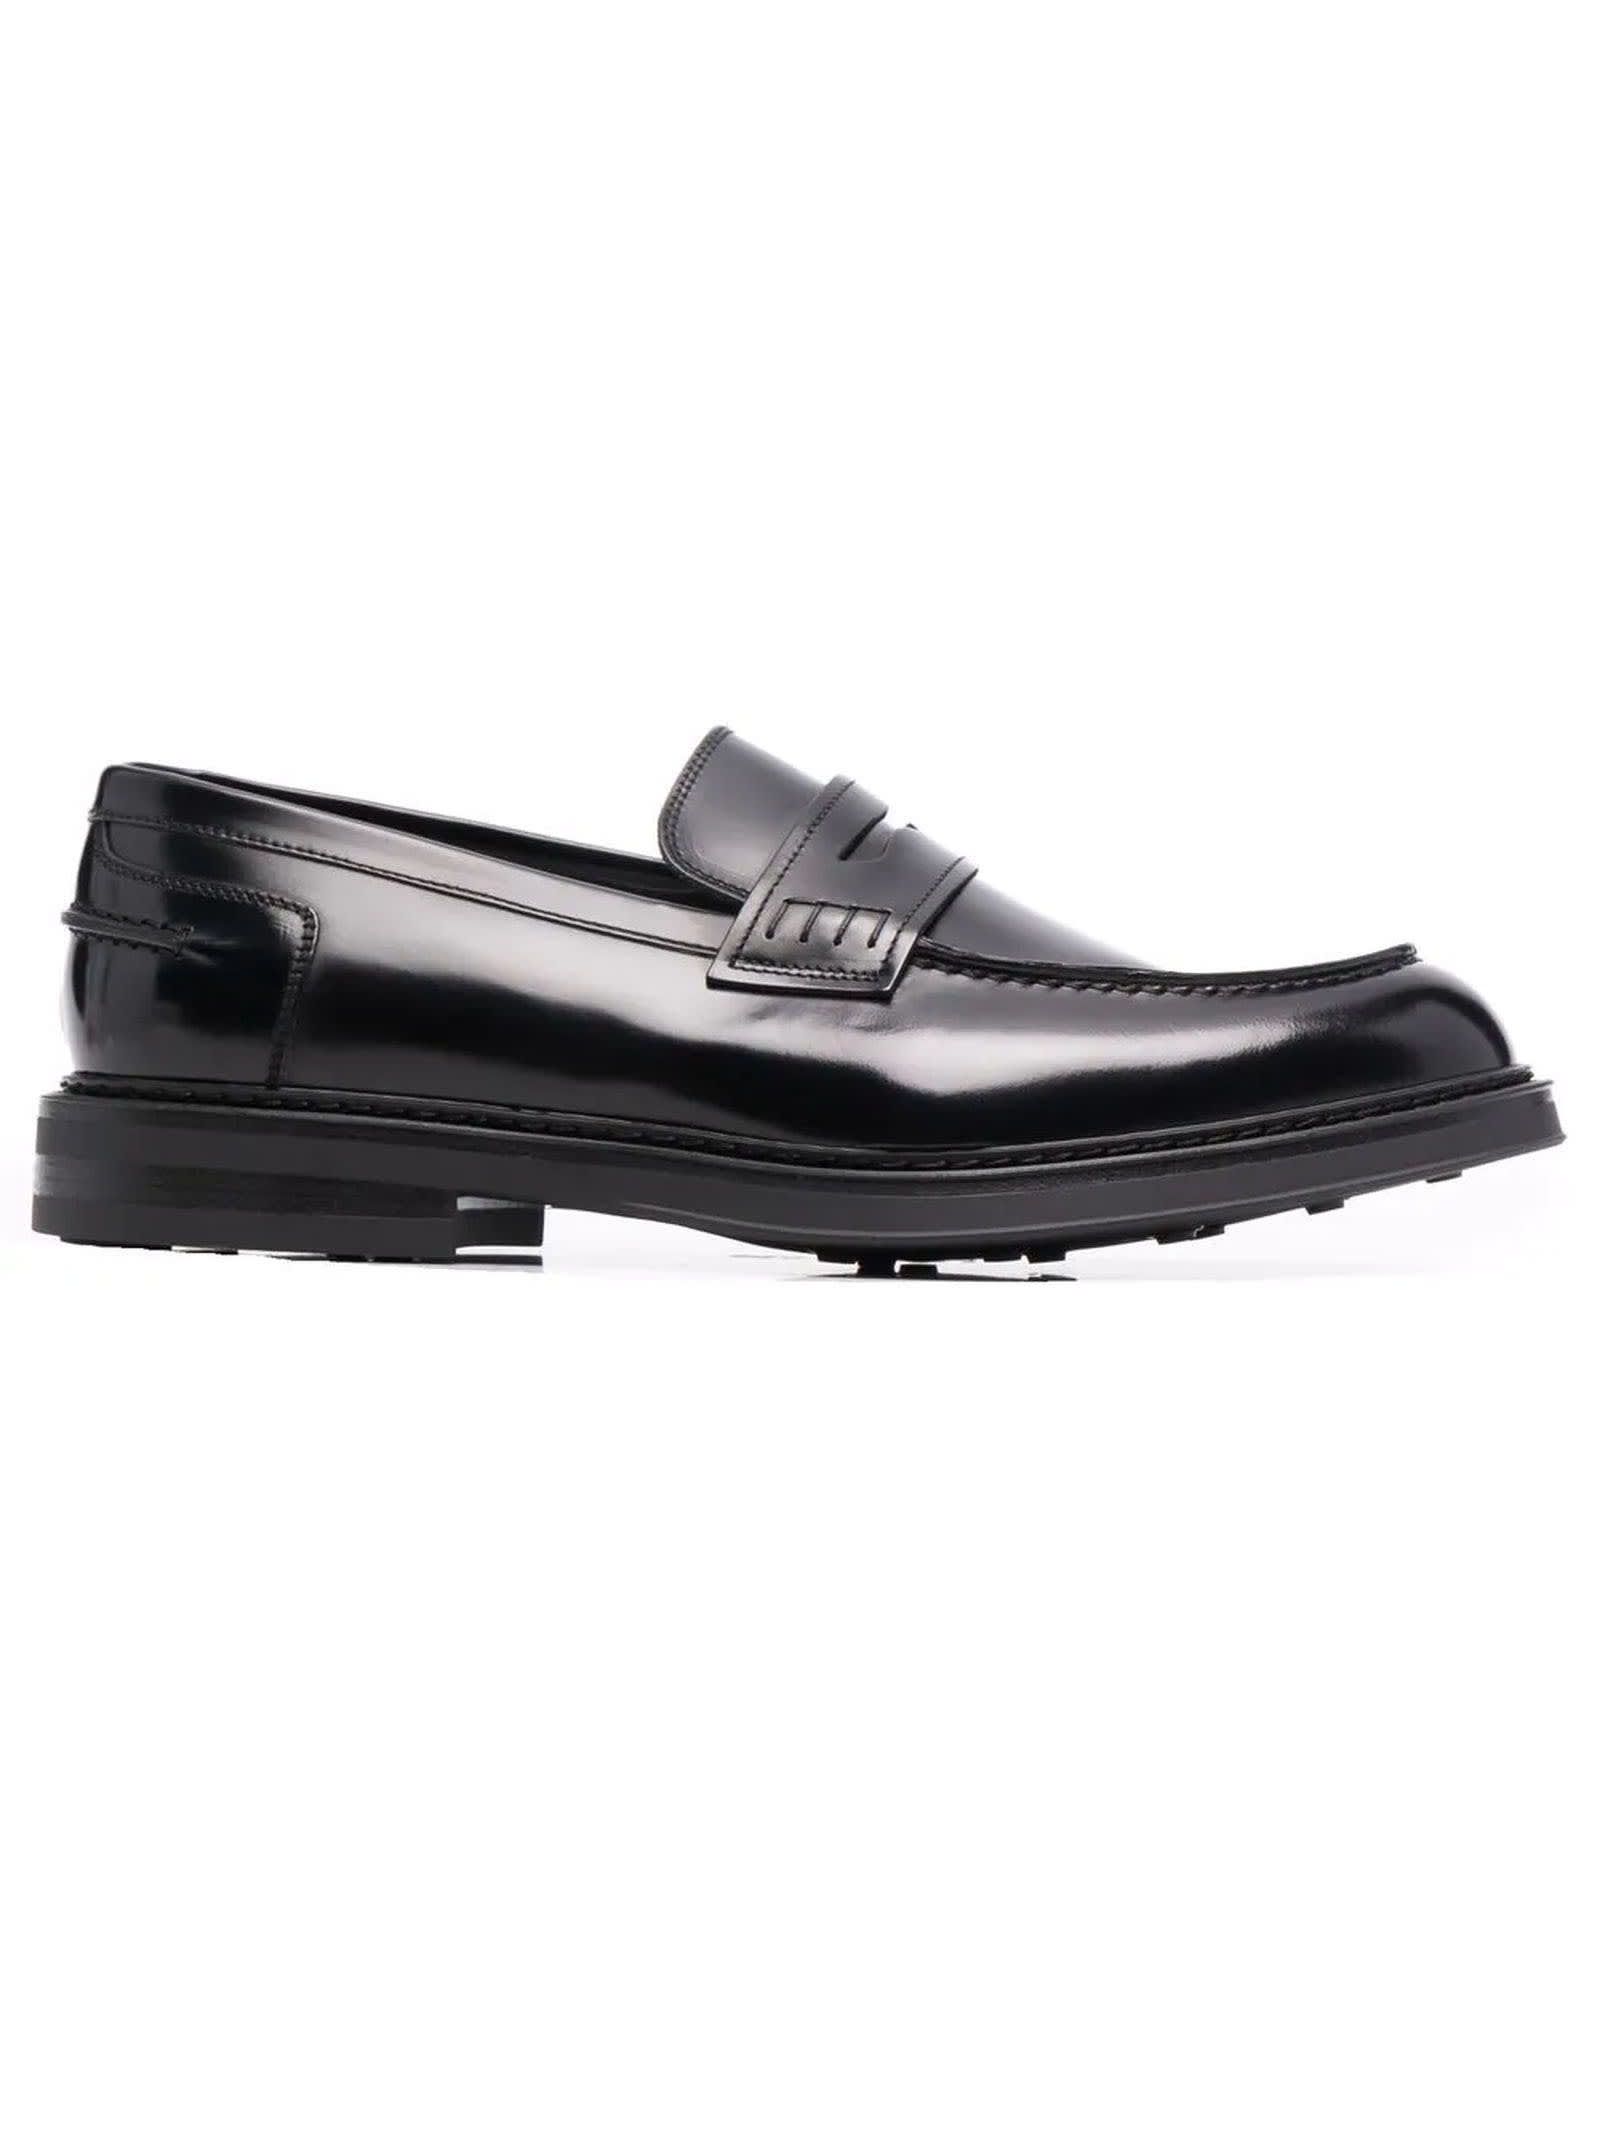 Doucals Black Calfskin Penny Loafers